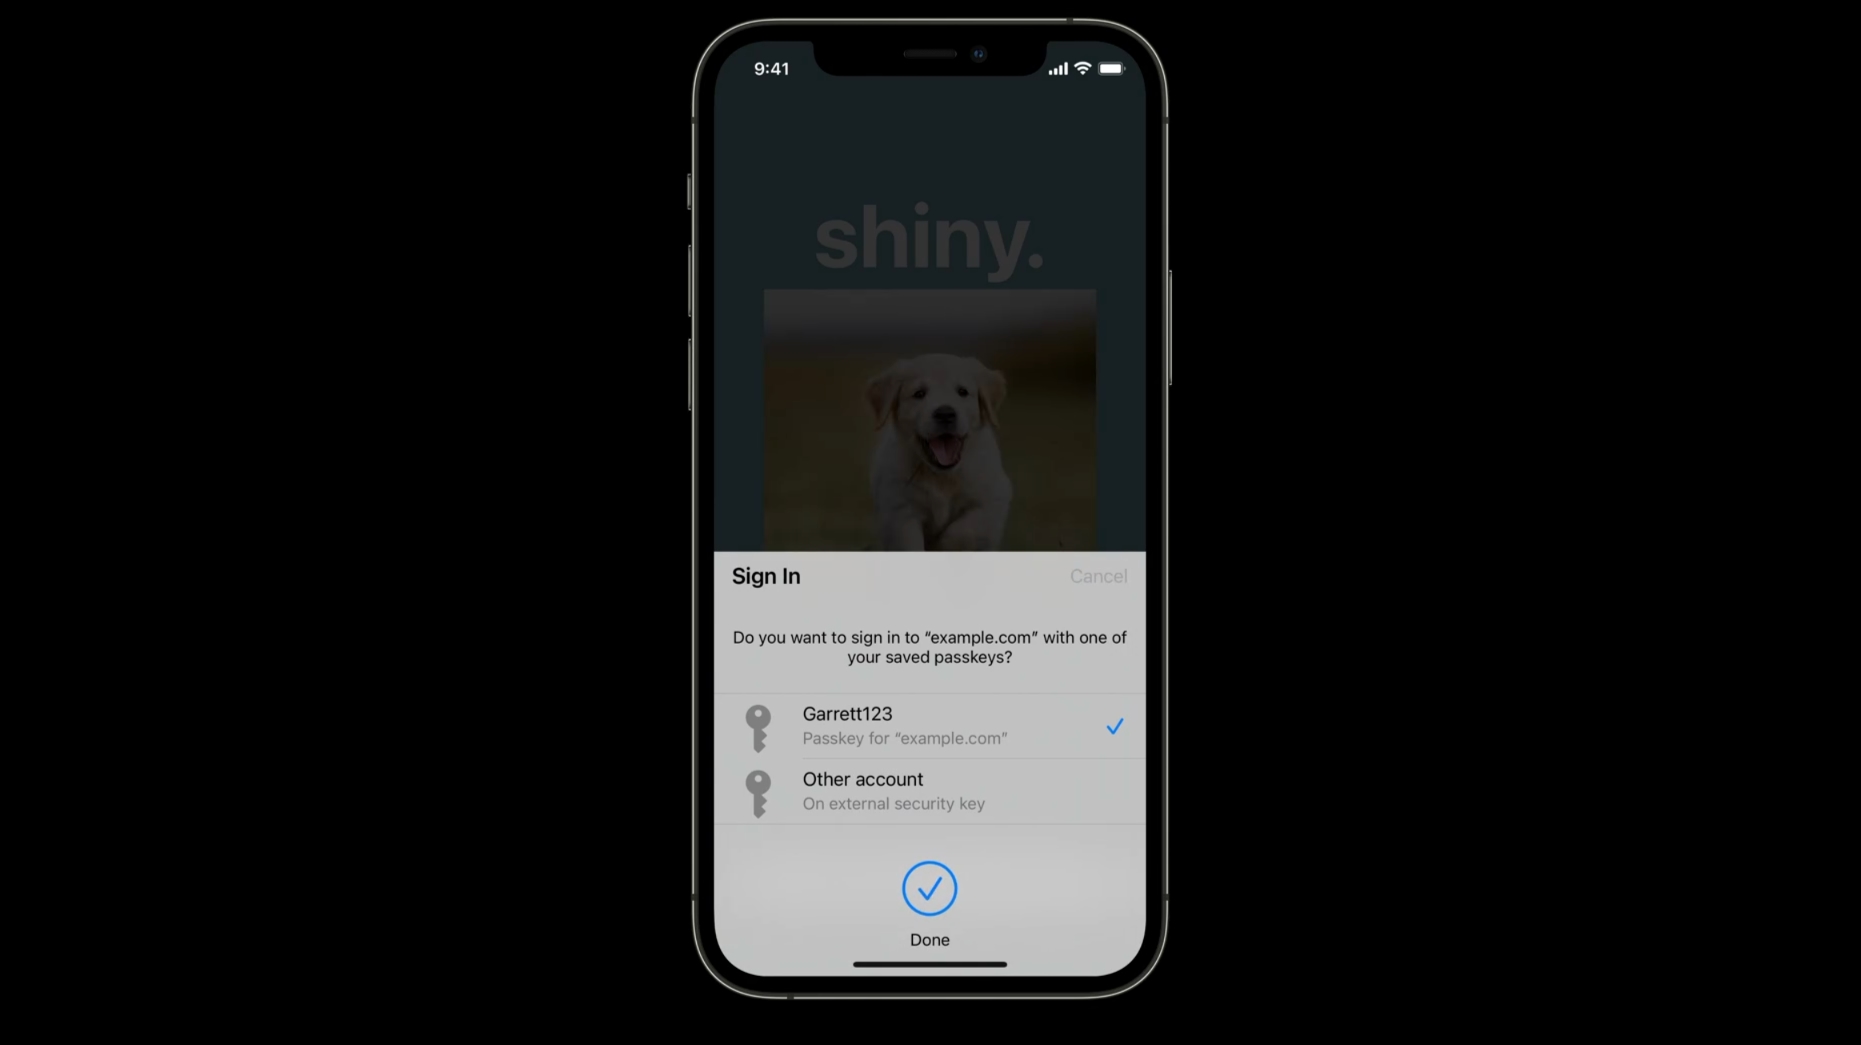 A slide from the WWDC21 session titled "Move beyond passwords" showcasing passkey technology used to sing in to an example app with Face ID on iPhone